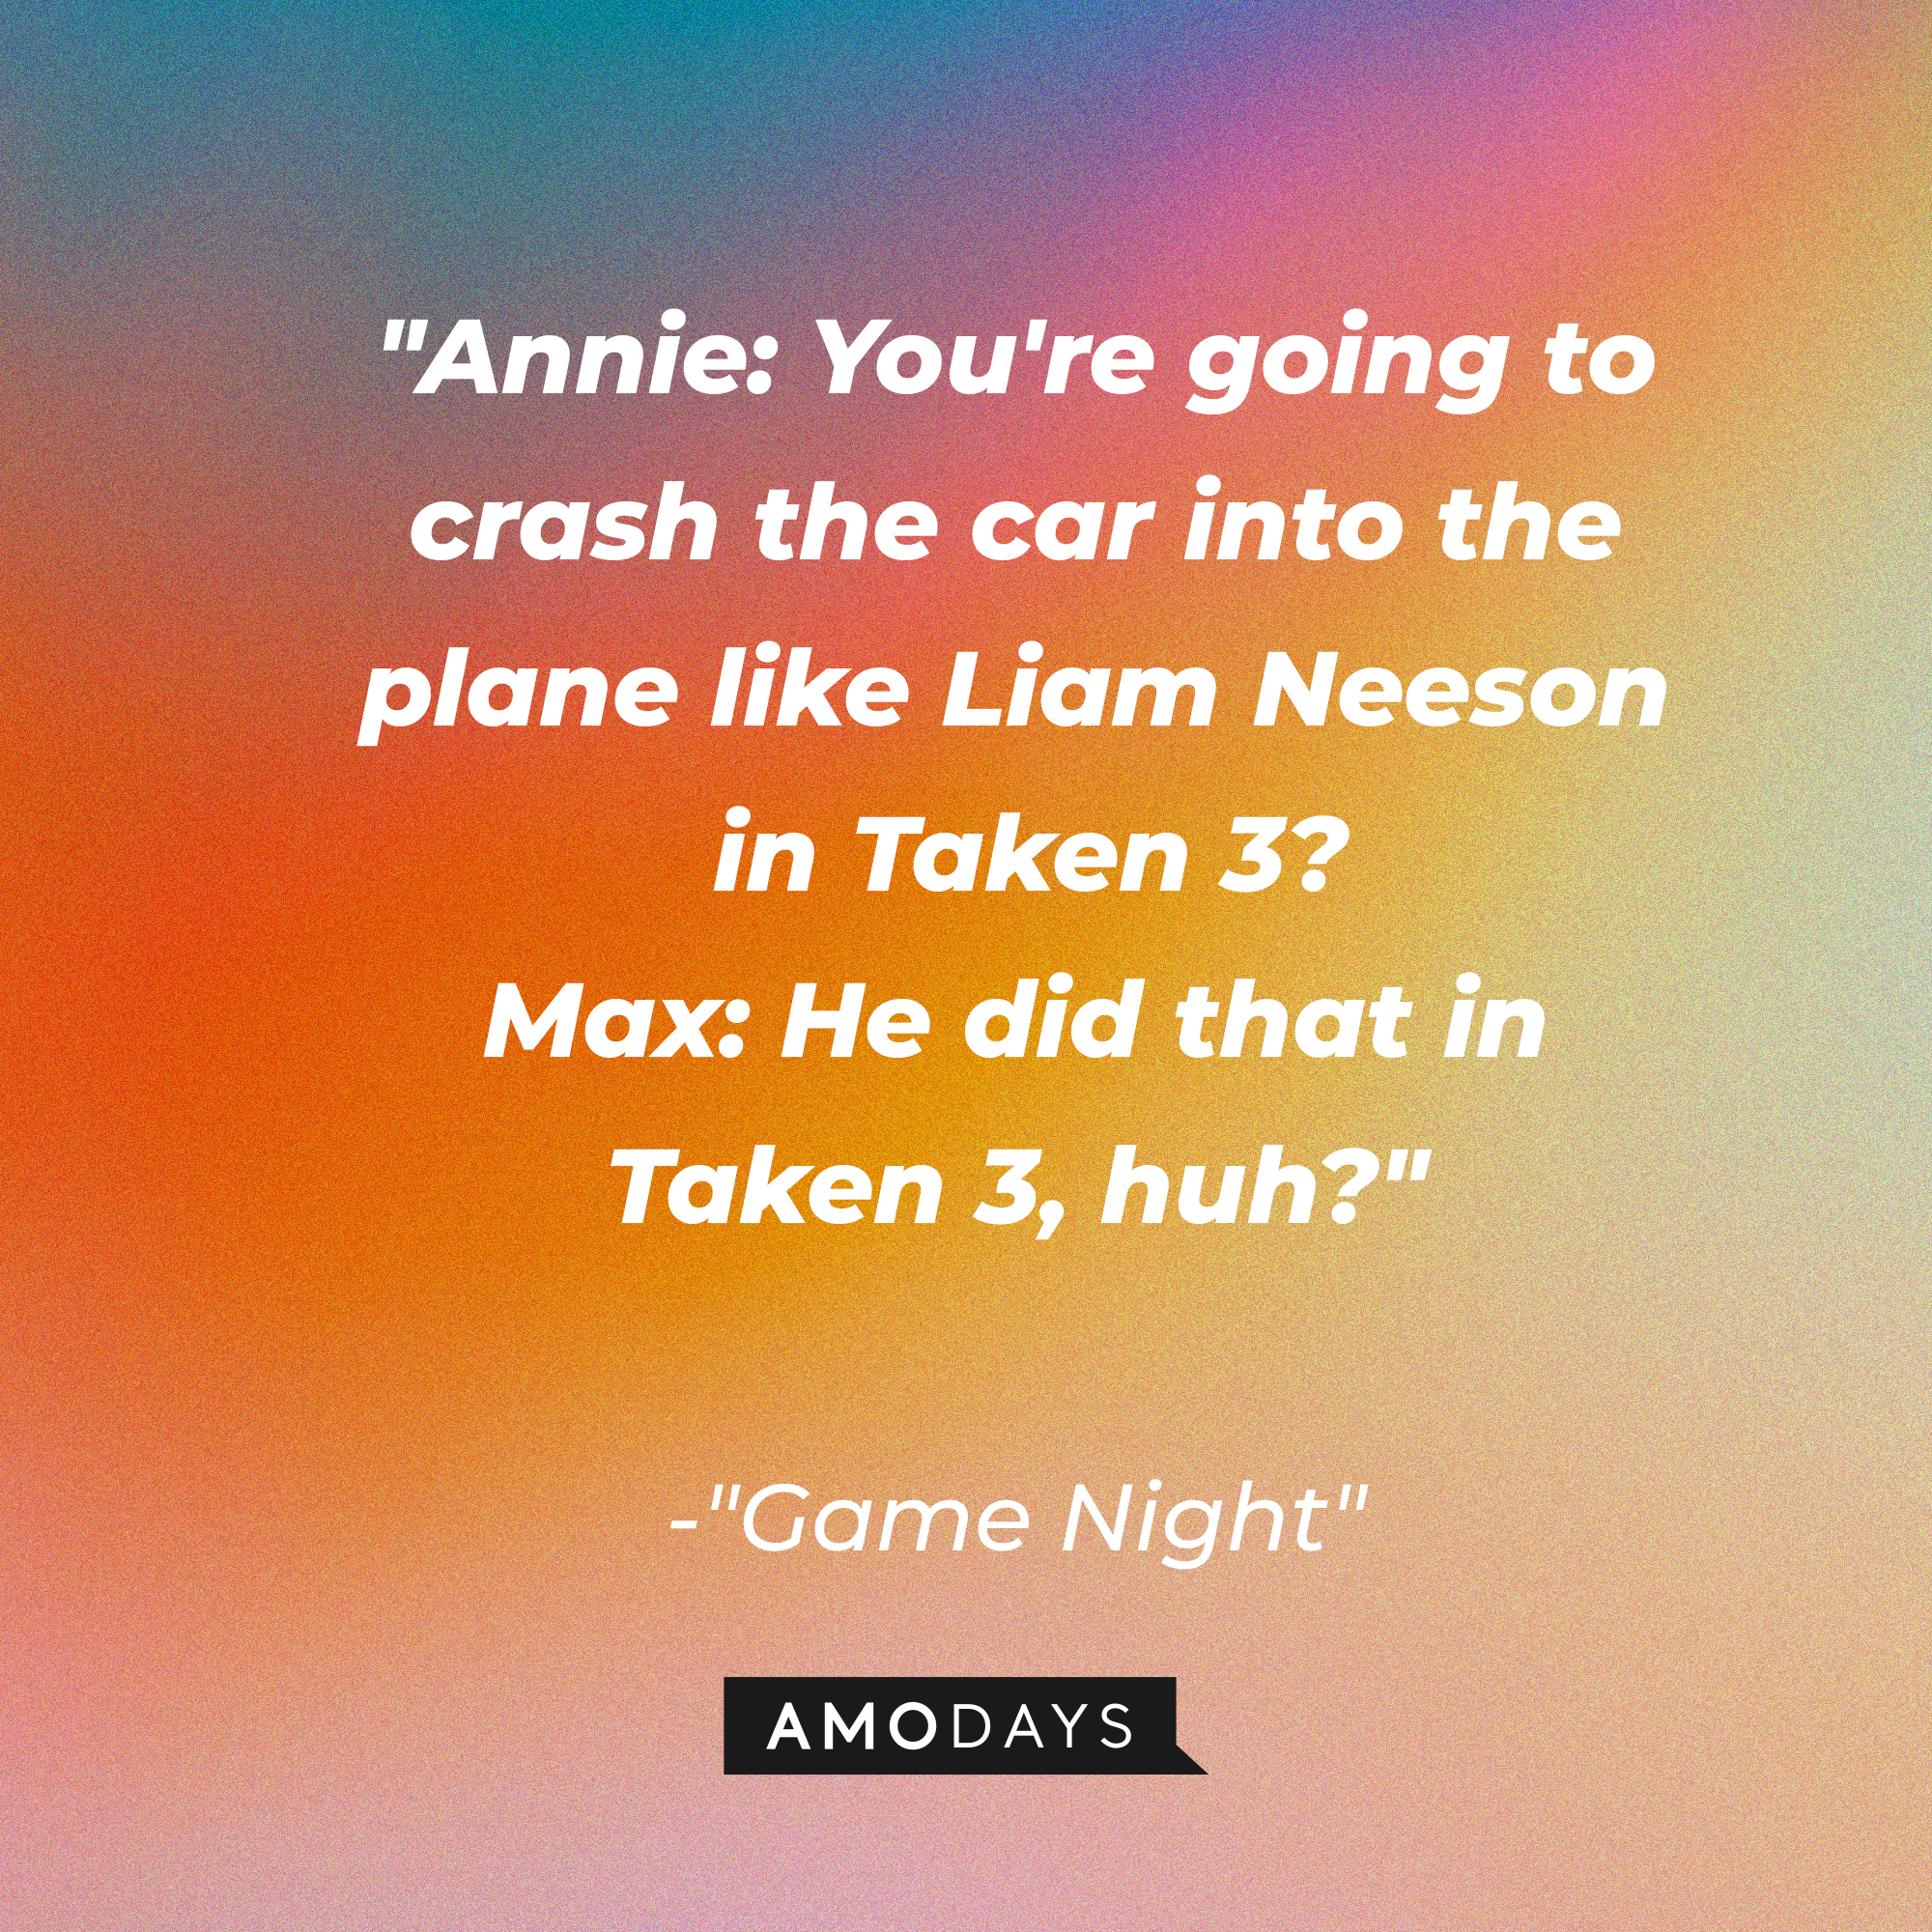 Quote from “Game Night”: “Annie: You're going to crash the car into the plane like Liam Neeson in Taken 3? Max: He did that in Taken 3, huh?” | Source: AmoDays